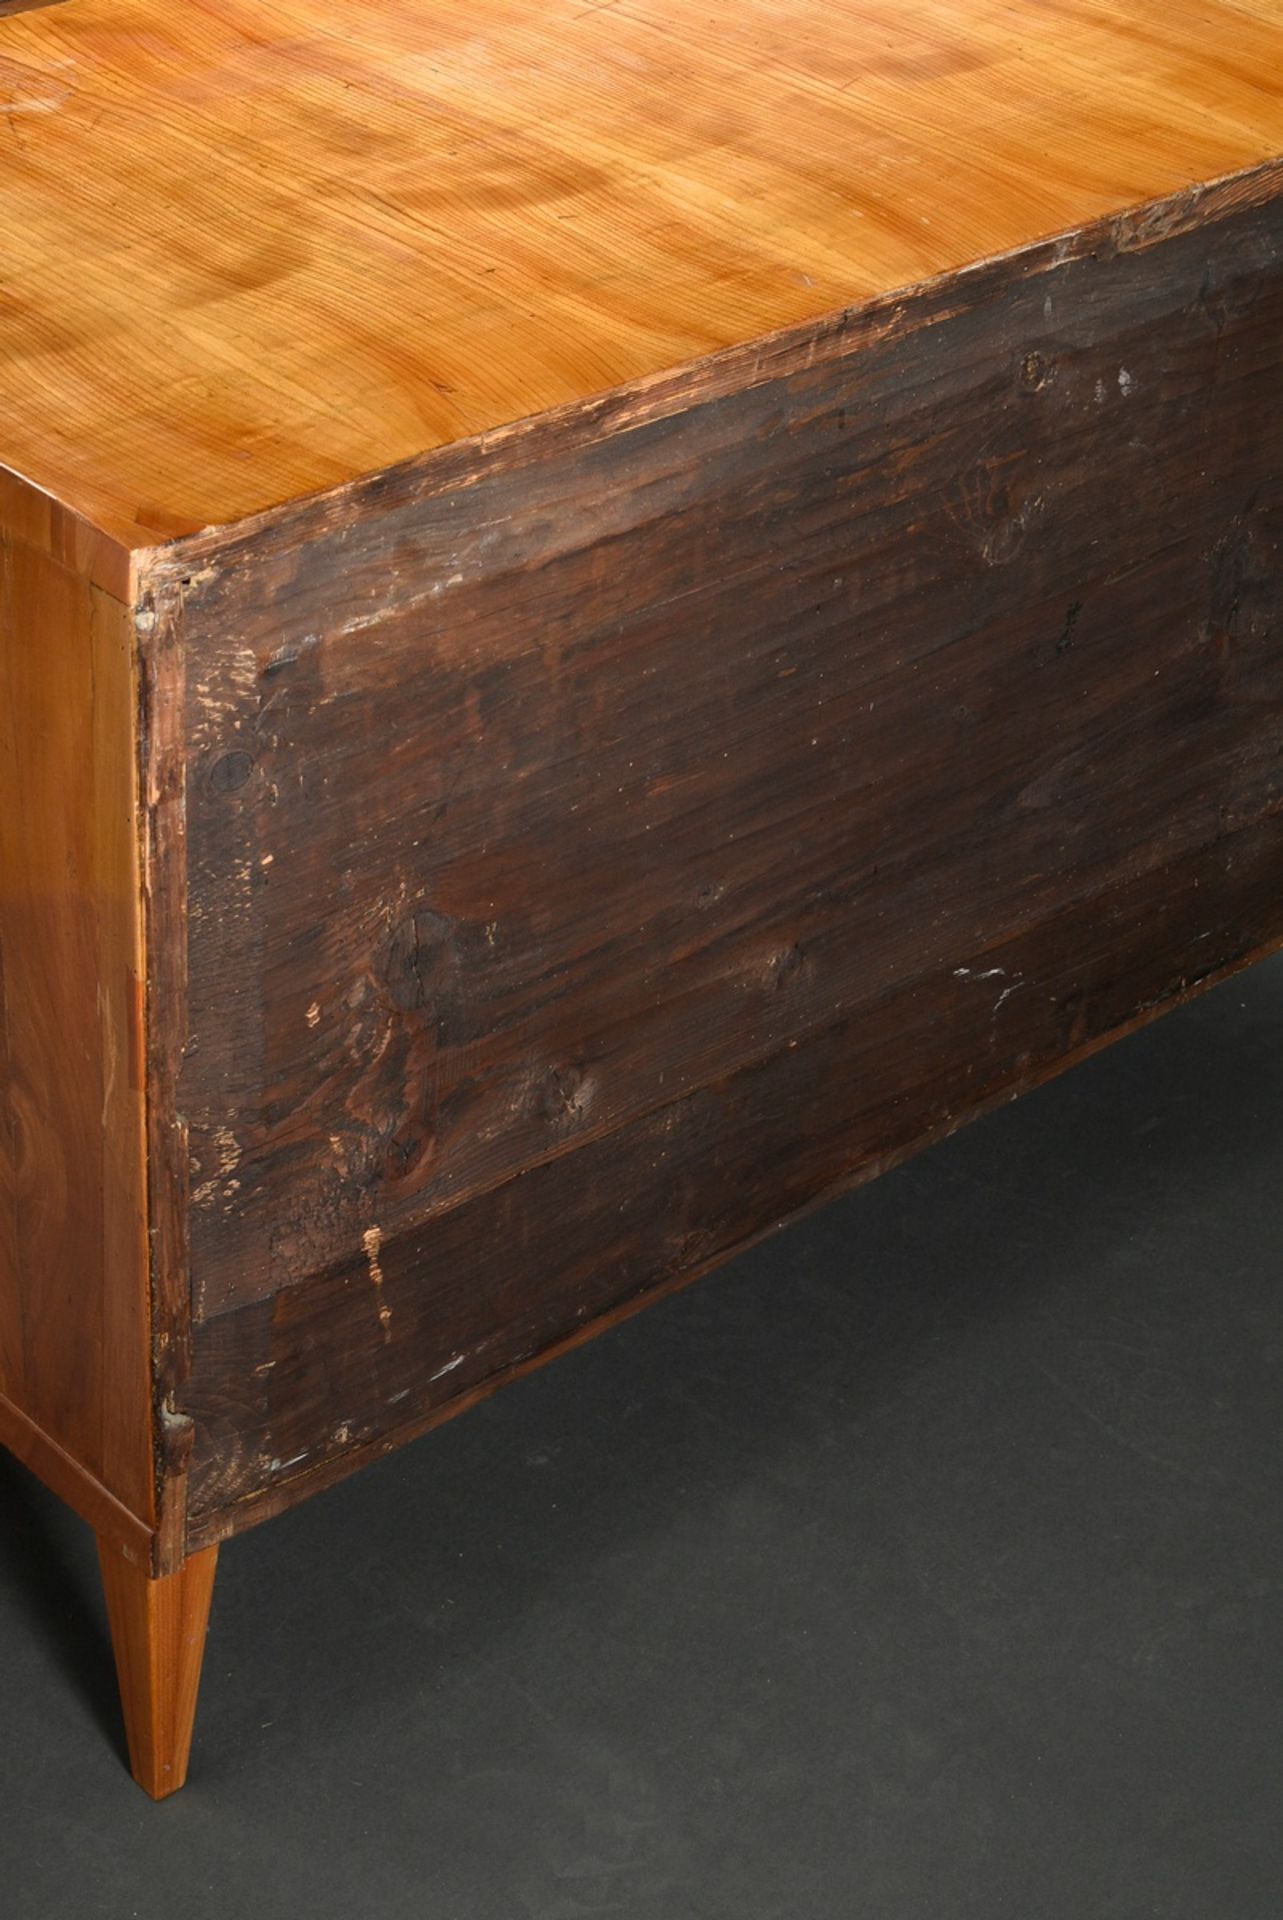 Two-bay chest of drawers in a simple façon, cherry/softwood veneer, body with bevelled corners, on  - Image 8 of 8